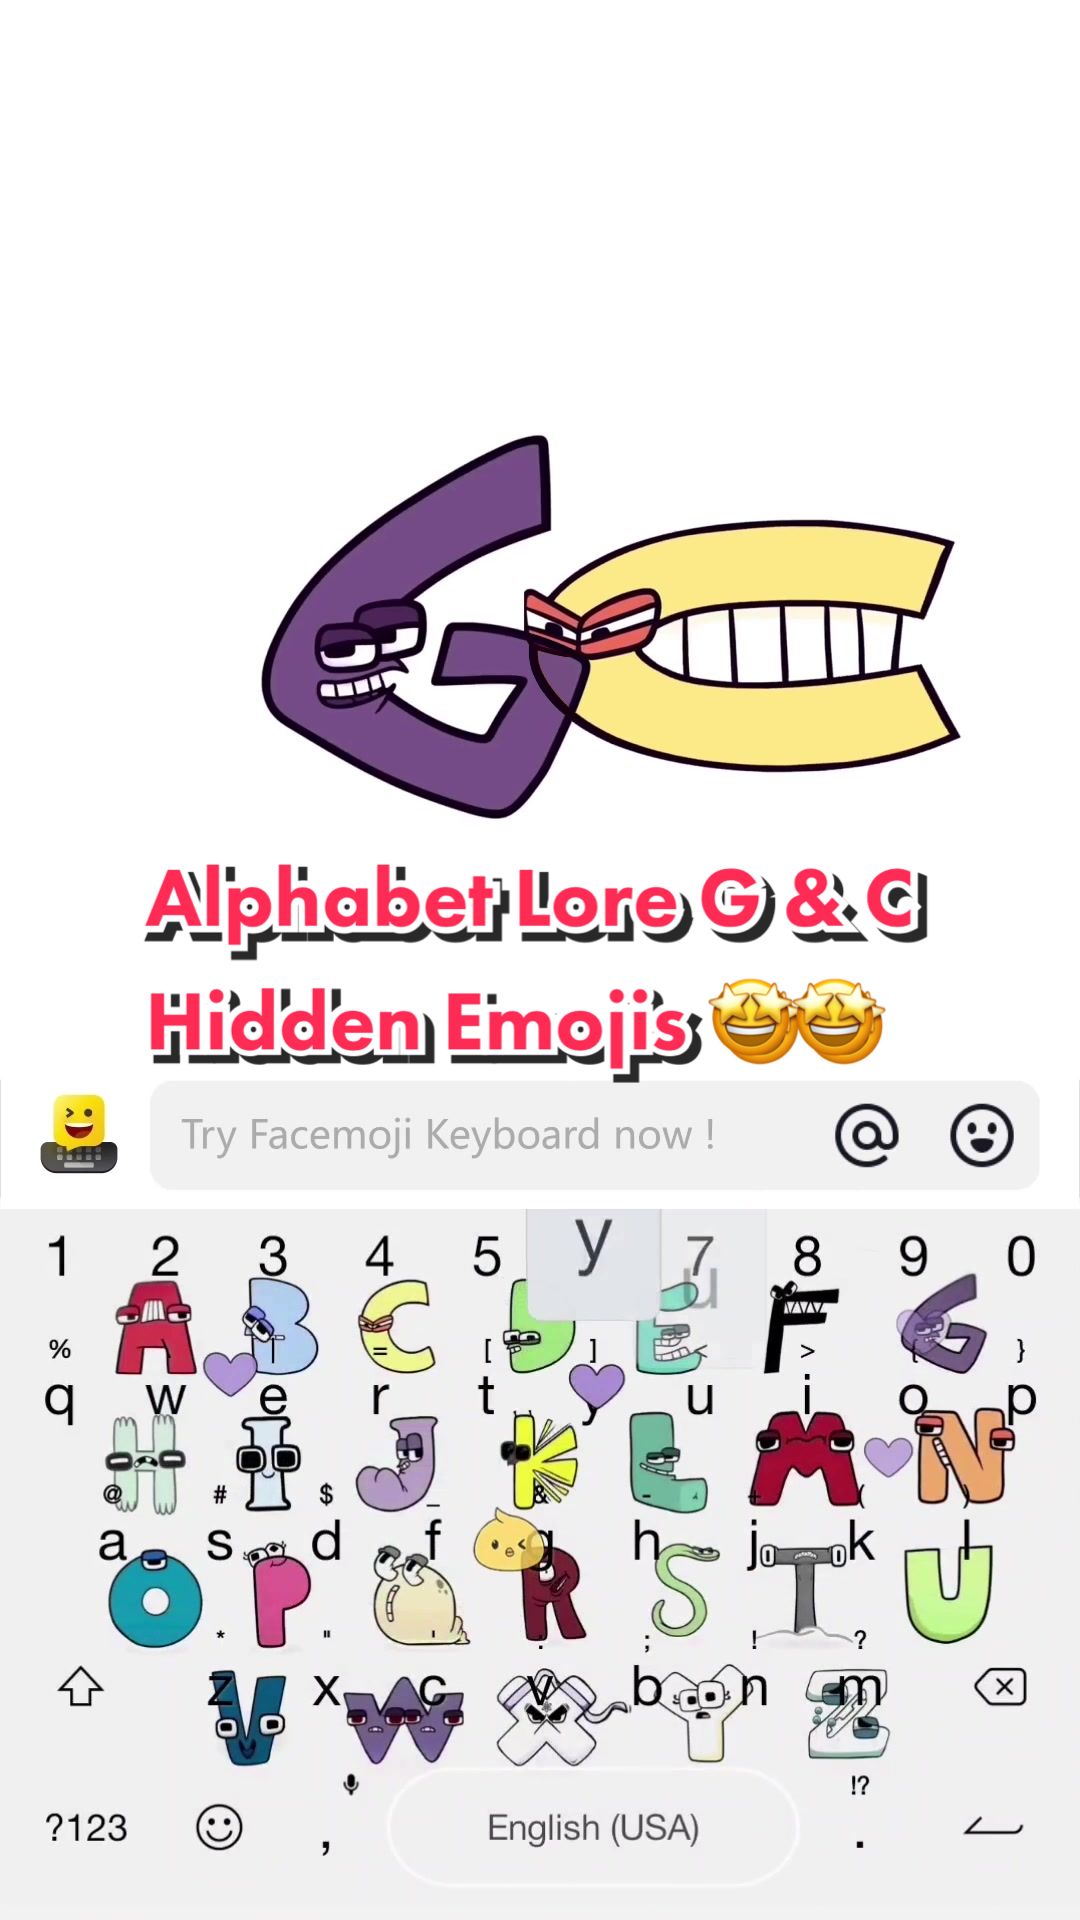 Is this Alphabet Lore A or actually they are all TikTok hidden emoji??